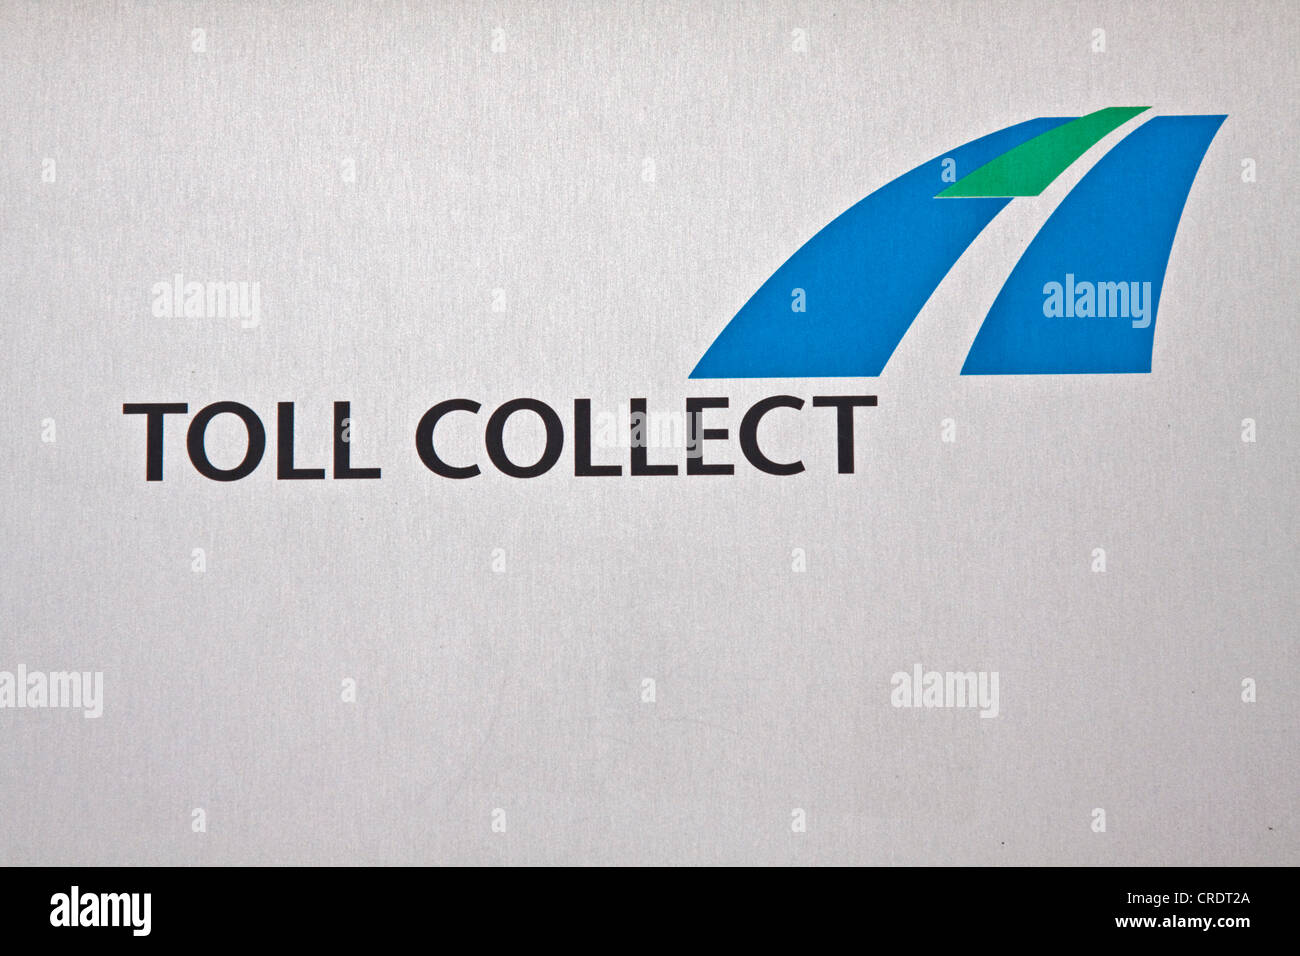 Toll Collect logo Stock Photo